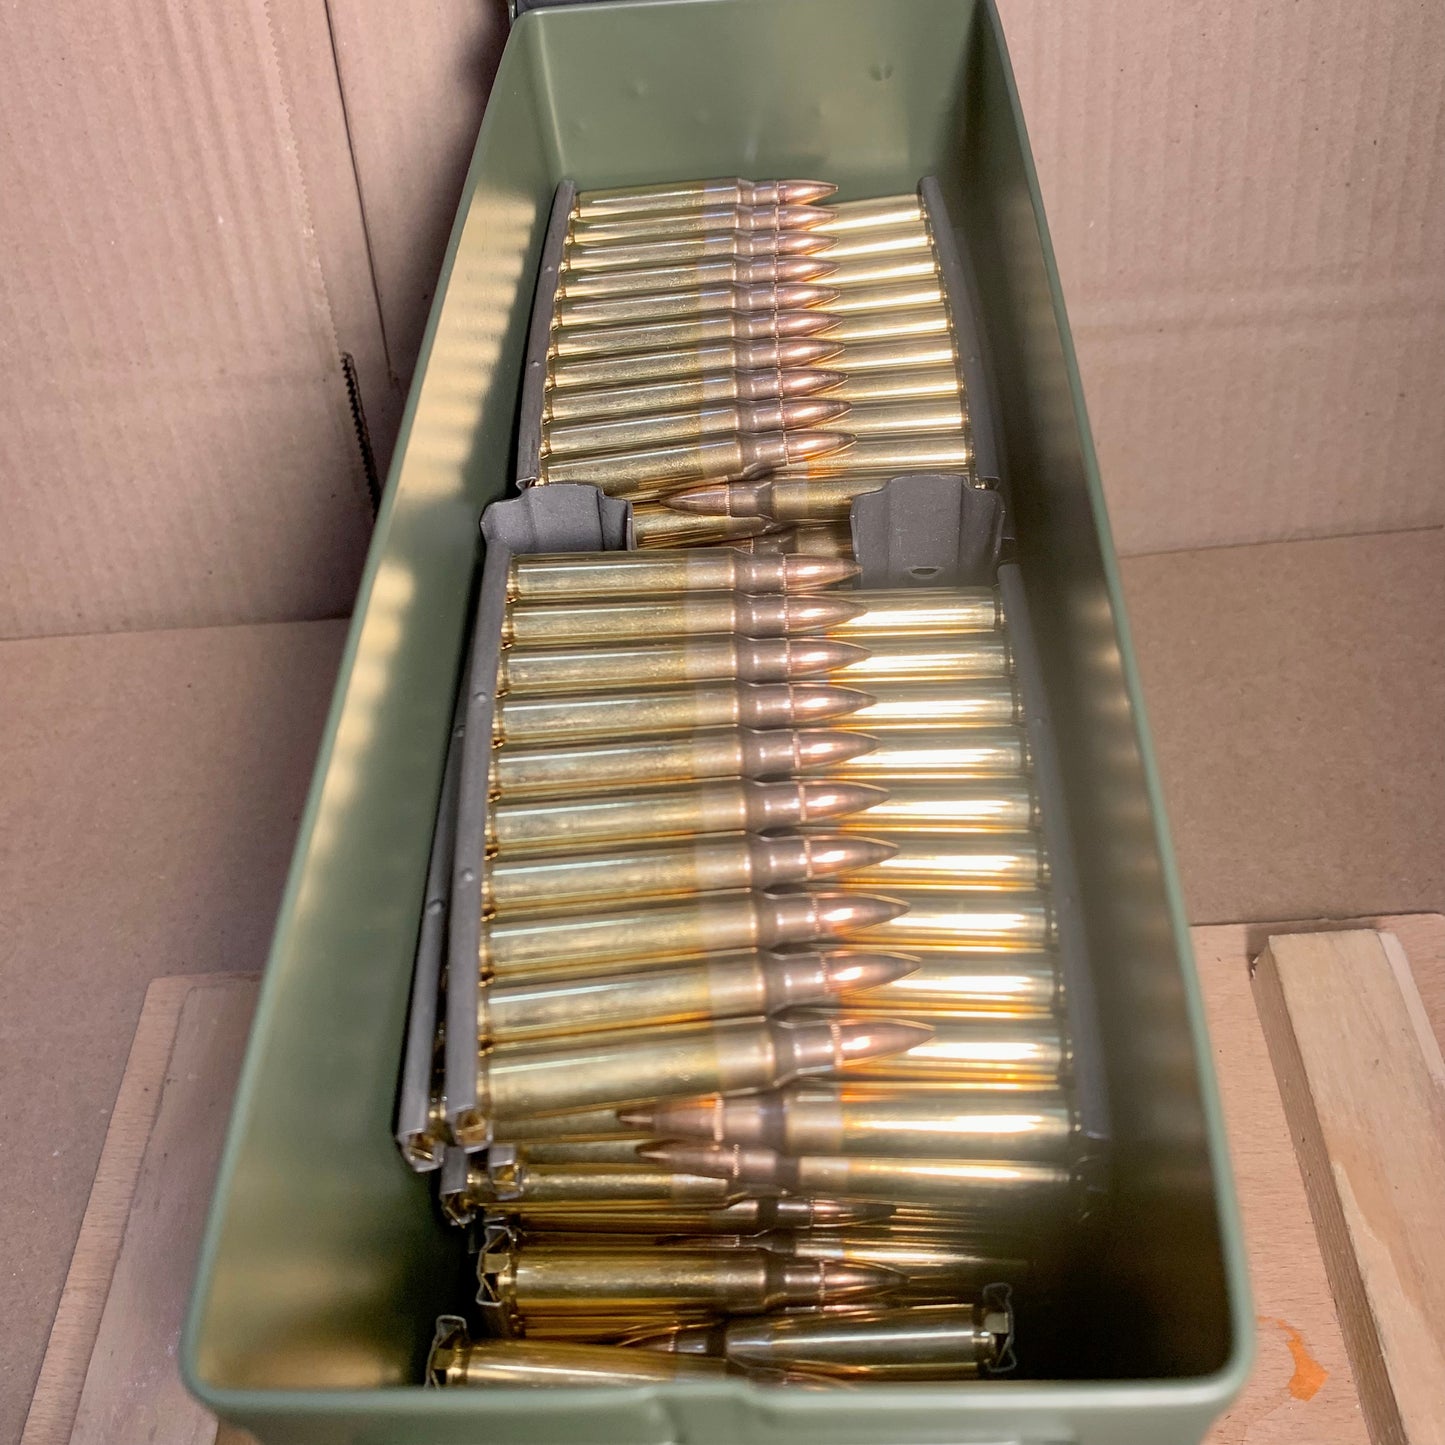 500 Round Can PMC X-Tac M193 5.56 NATO Ammo 55gr FMJ on Stripper Clips w/ Two Spoons